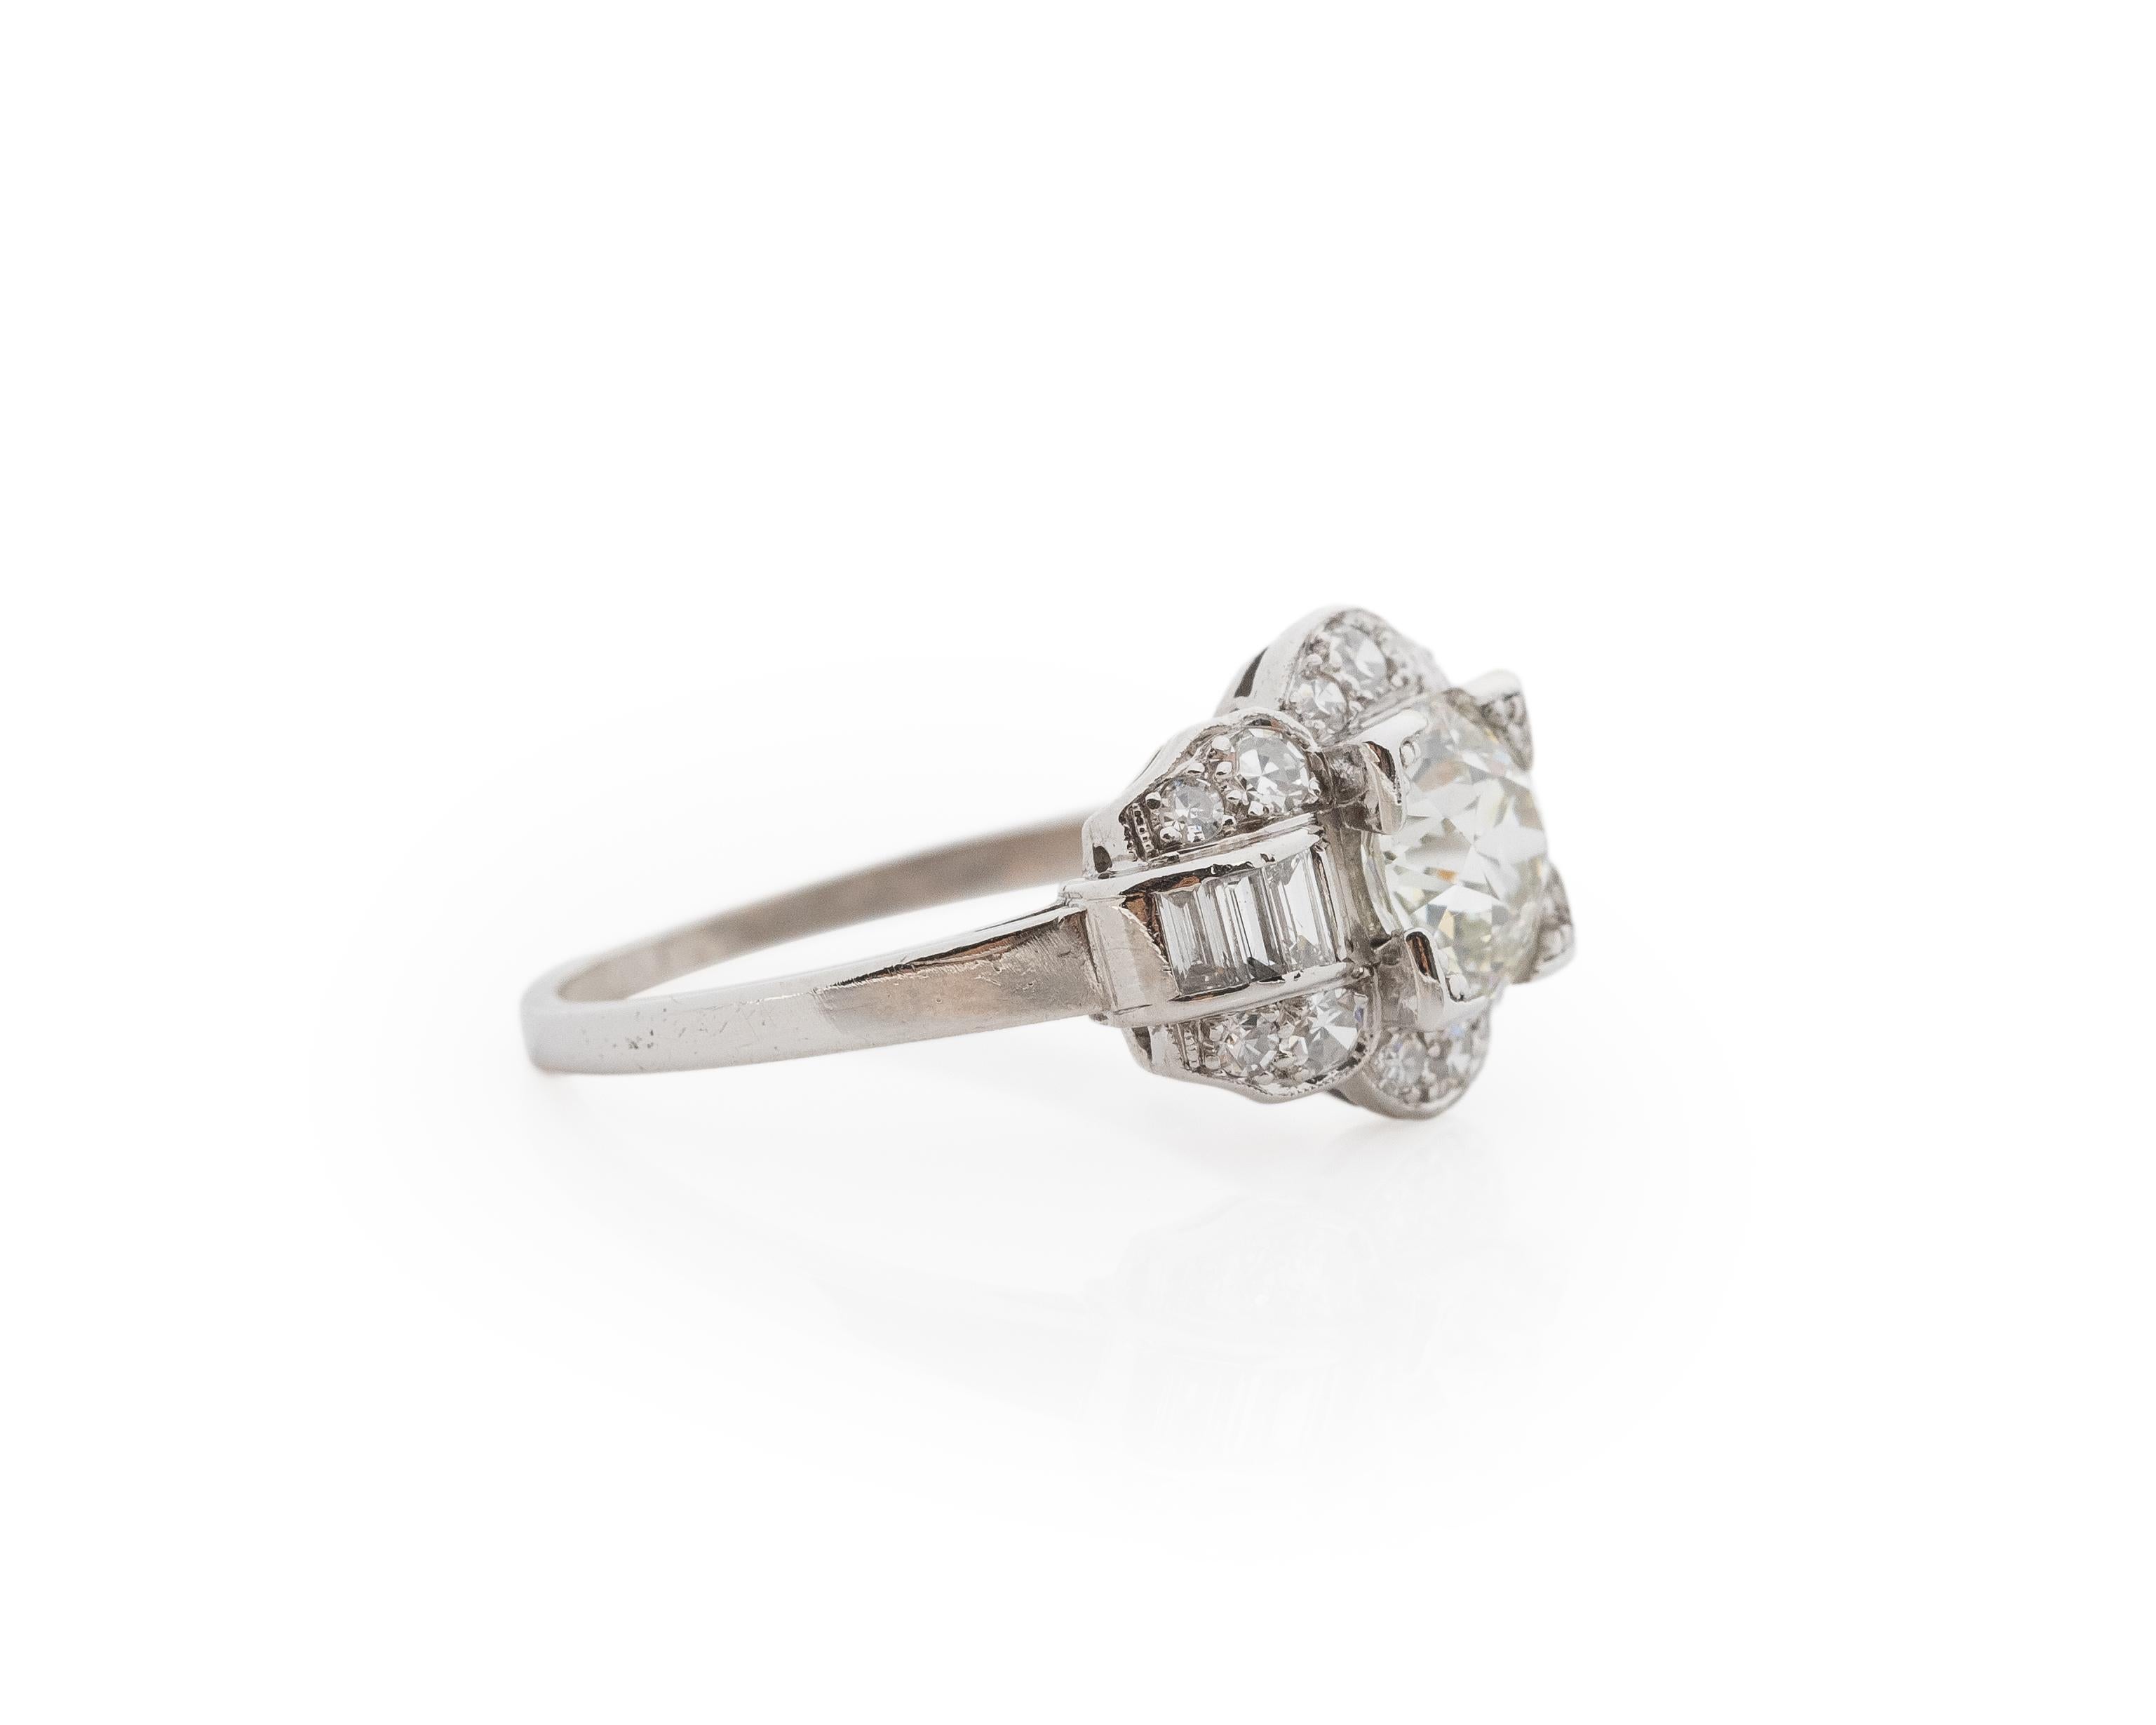 Year: 1920s

Item Details:
Ring Size: 7.5
Metal Type: Platinum [Hallmarked, and Tested]
Weight: 4.4 grams

Diamond Details:

GIA Report#:2239139553
Weight: 1.08ct total weight
Cut: Old European brilliant
Color: K
Clarity: VS1
Type: Natural

Finger